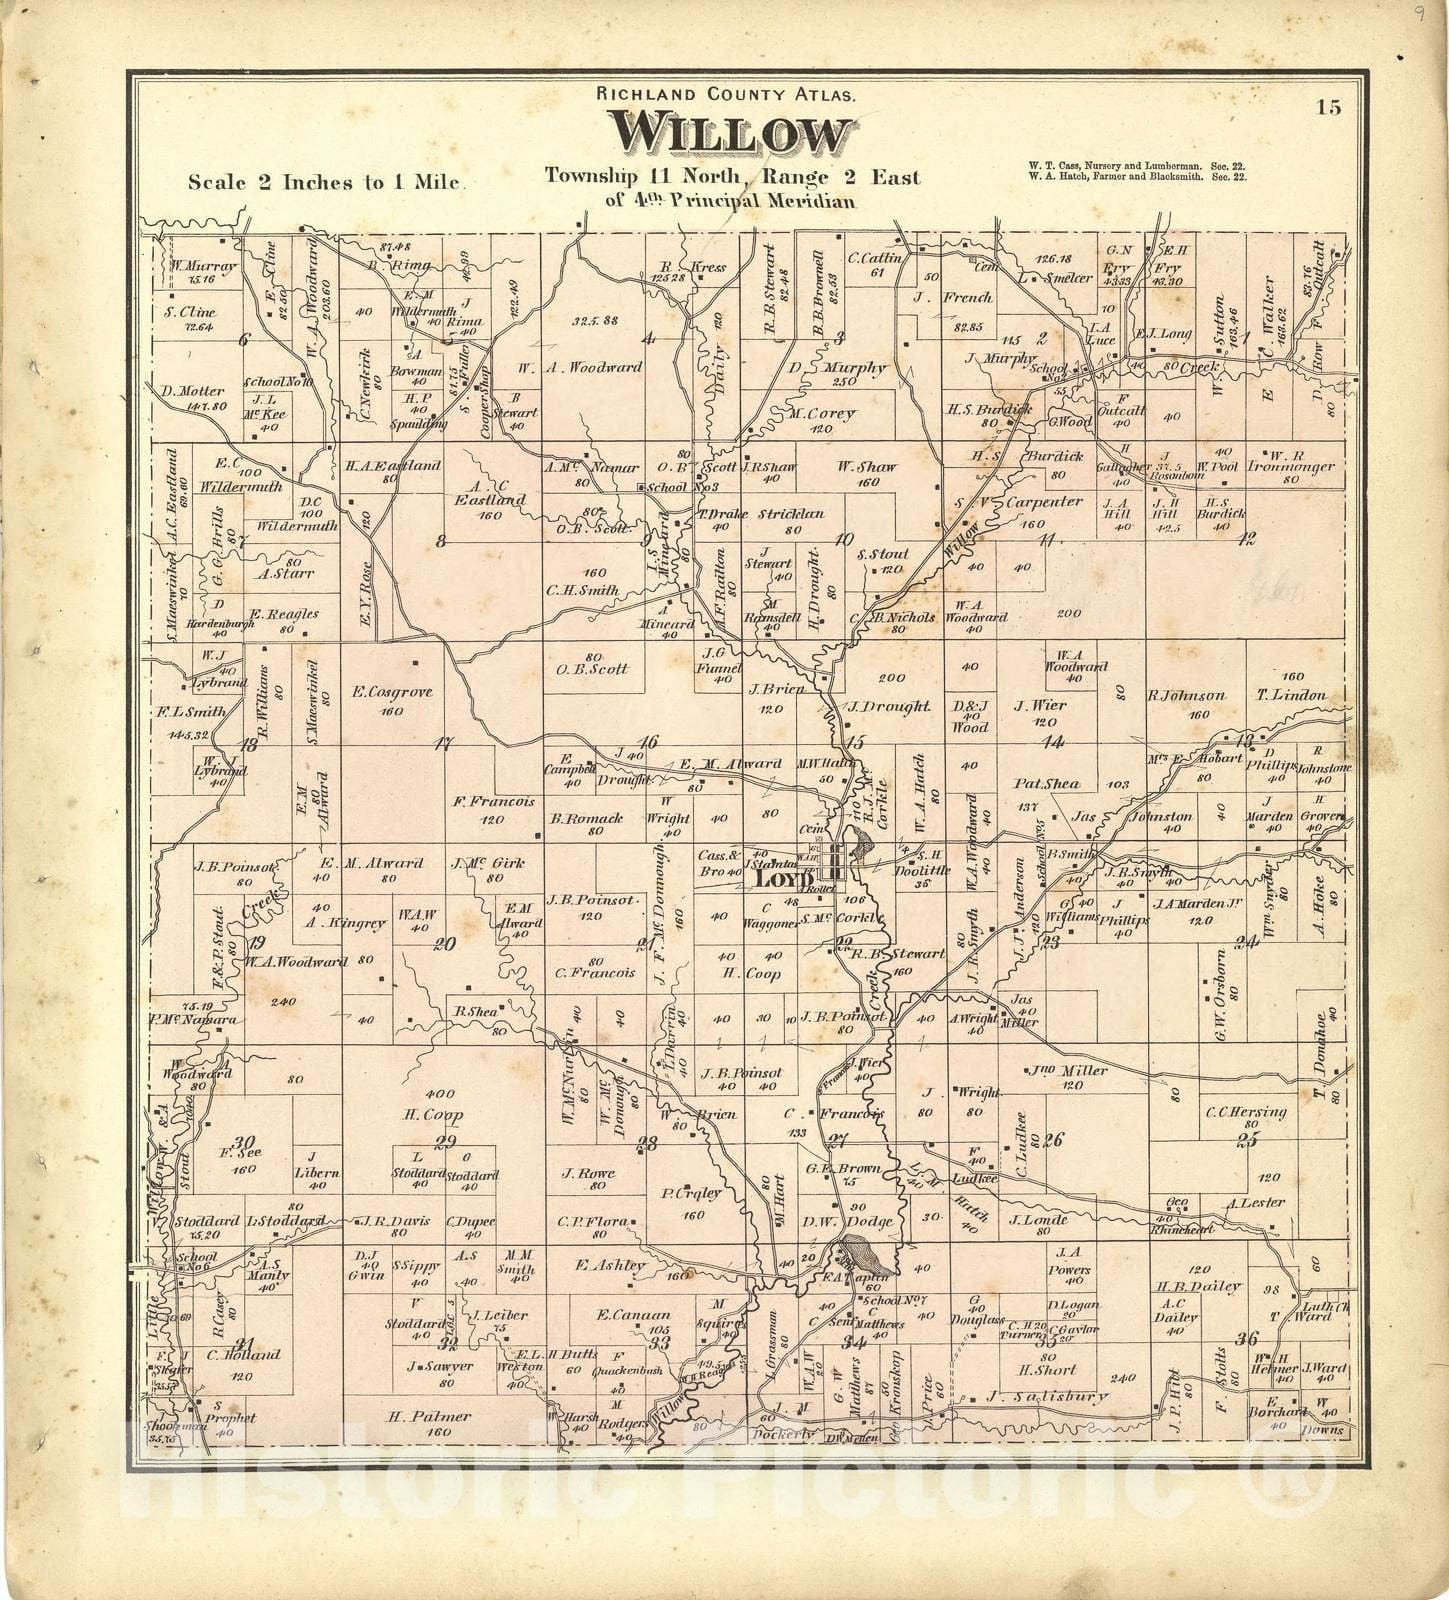 Historic 1874 Map - Atlas of Richland Co, Wisconsin - Map of Willow - Atlas of Richland County, Wisconsin